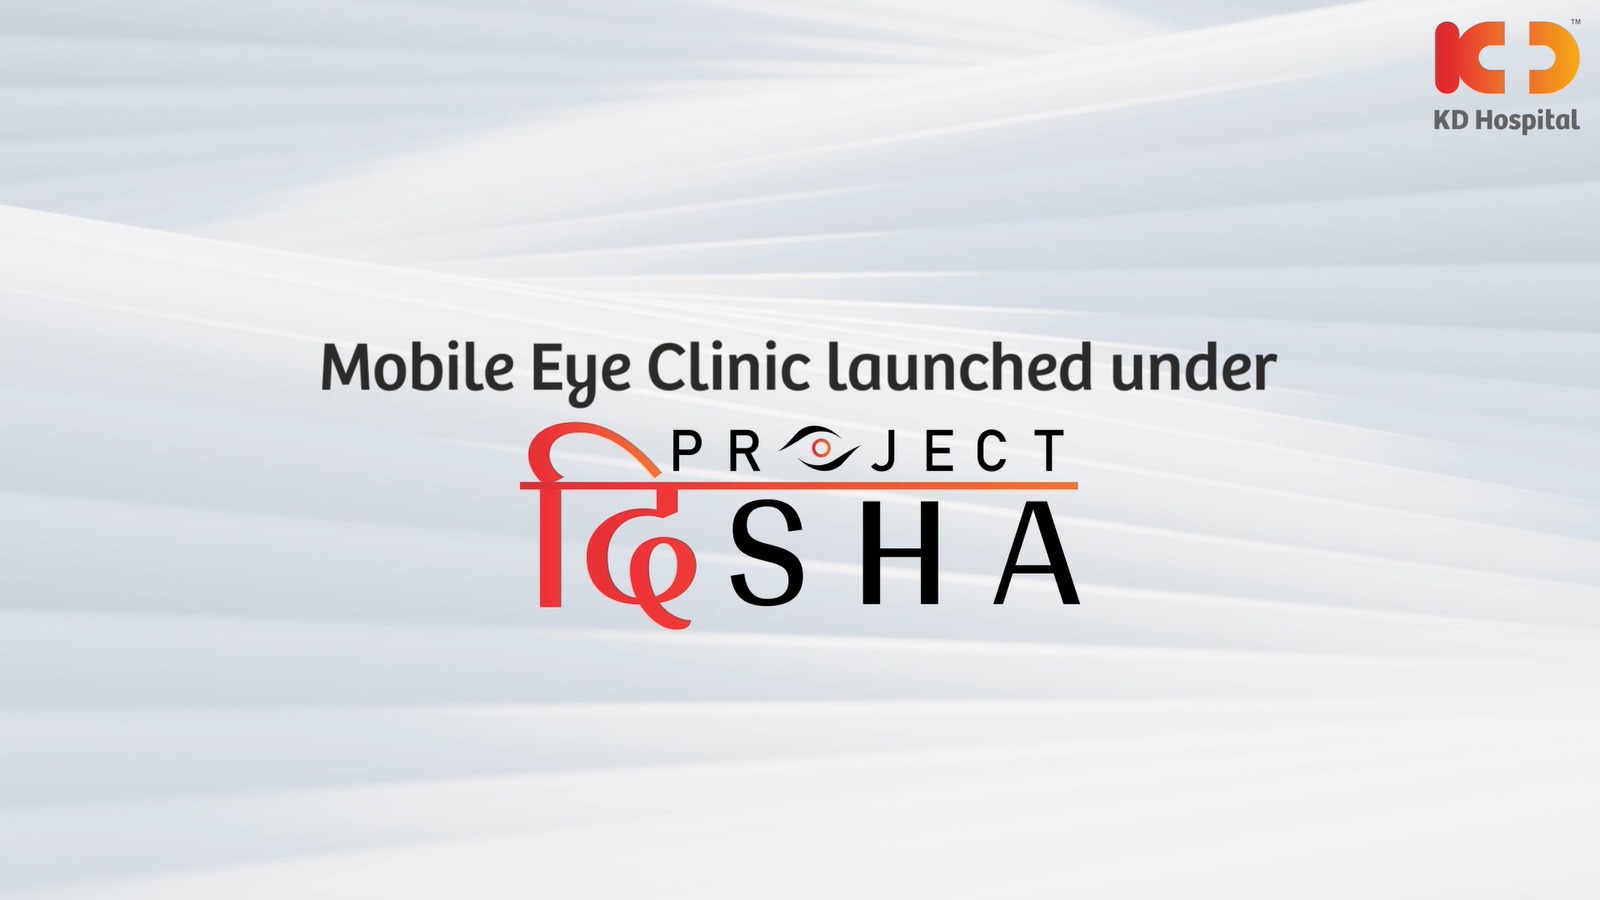 Within just a month of it's inception, we are proud to announce that KD Hospital 's Project Disha has completed 4 Comprehensive Eye checkup camps & 157 Surgeries while examining more than 1100 patients
Our mission to reach the unreached and provide quality eye care to the needy is just beginning.

#KDHospital #ProjectDisha #EyeCare #MobileEyeClinic #EyeClinic #Doctors  #surgery  #patientcare #avoidableblindness #cataract #operate  #sight #sightforall #2030insight #vision #community #cataract #eye #eyehealth #visionforeveryone #sightforall  #eyelidsurgery  #oculoplasty #EyeCare #wellness  #wellnessthatworks  #healthcare  #YoursToMake #Ahmedabad #Gujarat